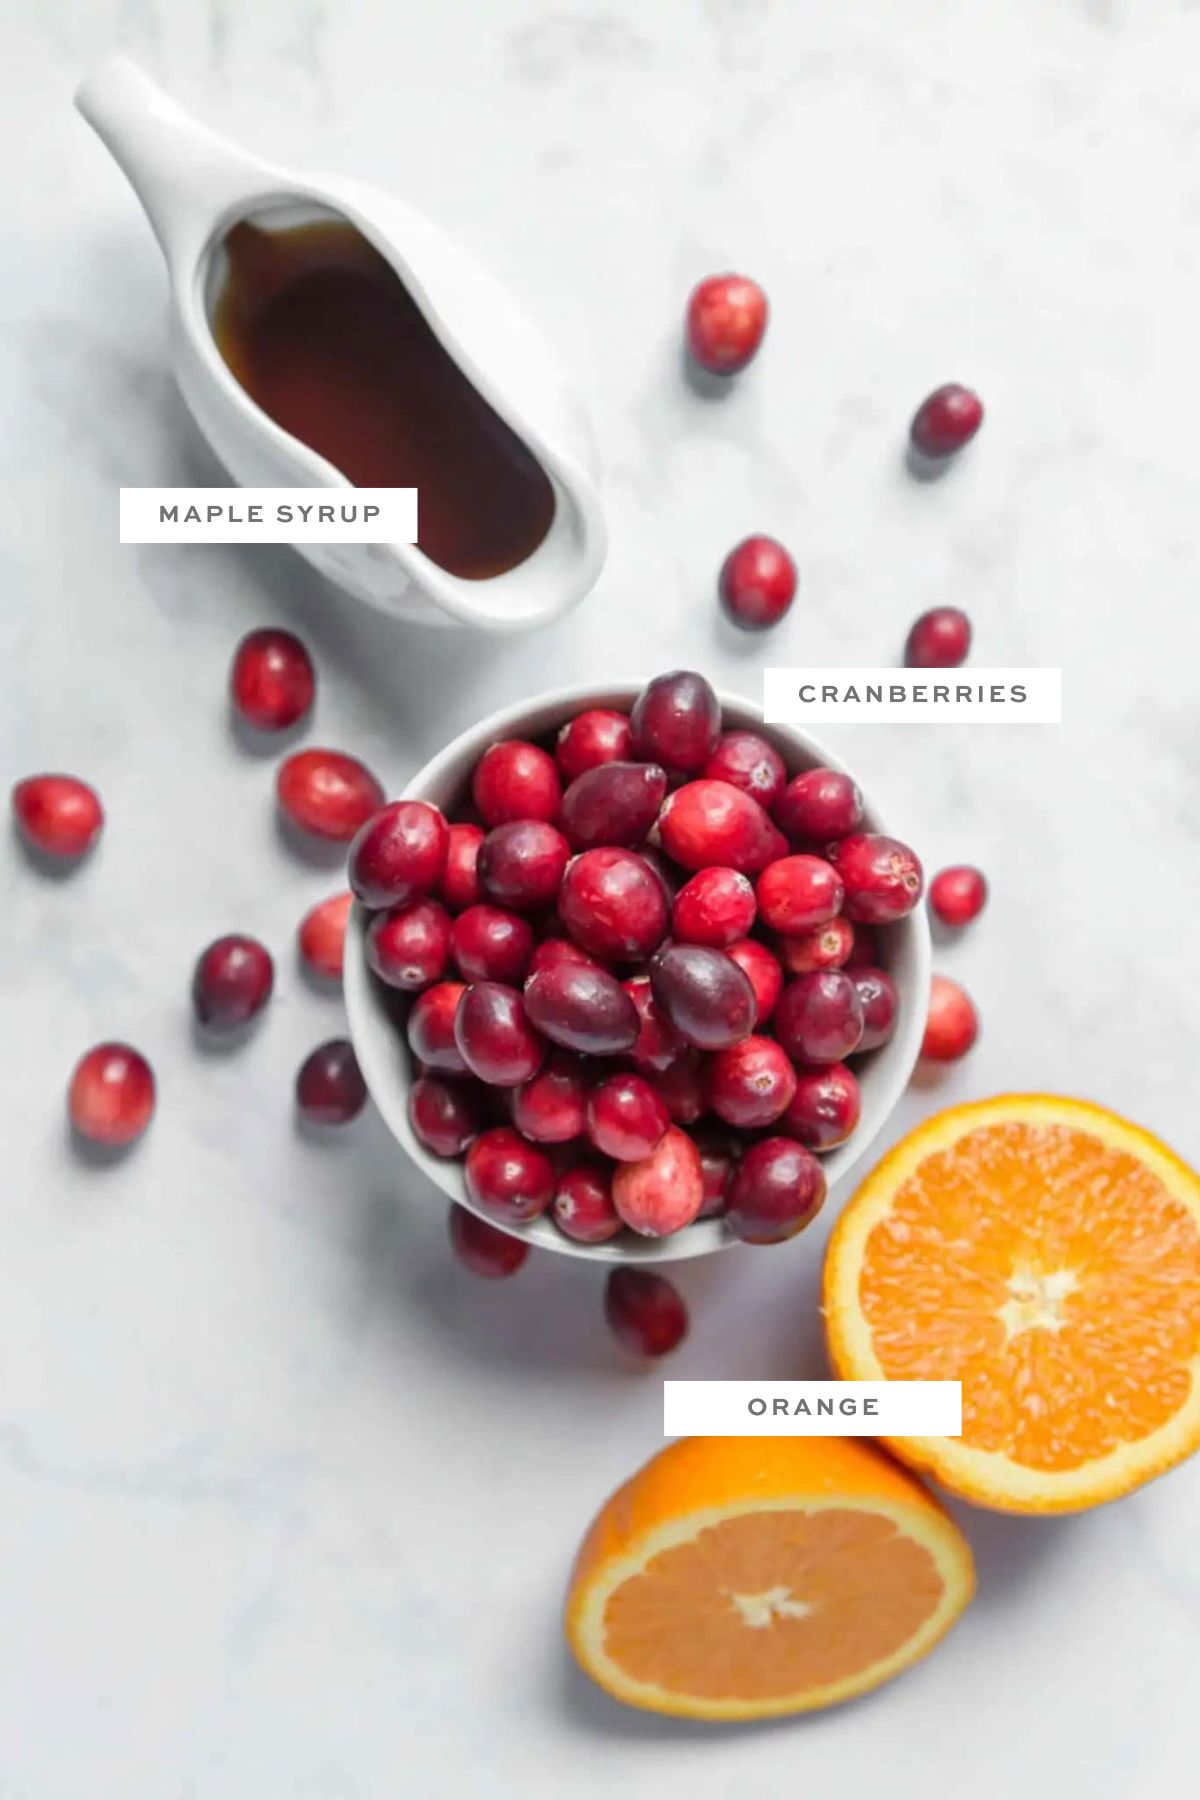 Key ingredients for vegan cranberry sauce with labels.